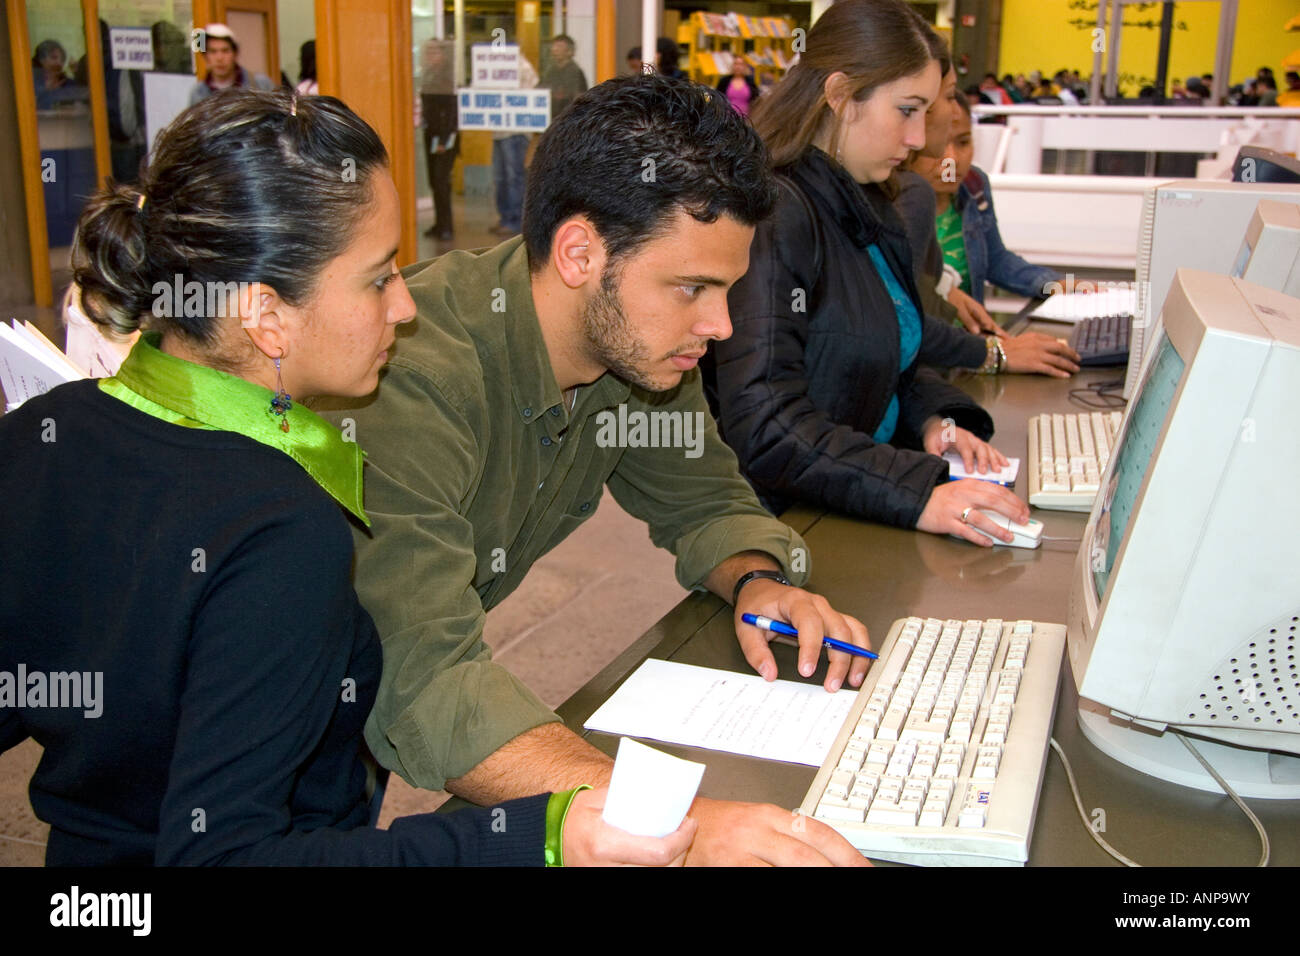 Students study on computers at the National Autonomous University of Mexico in Mexico City Mexico Stock Photo